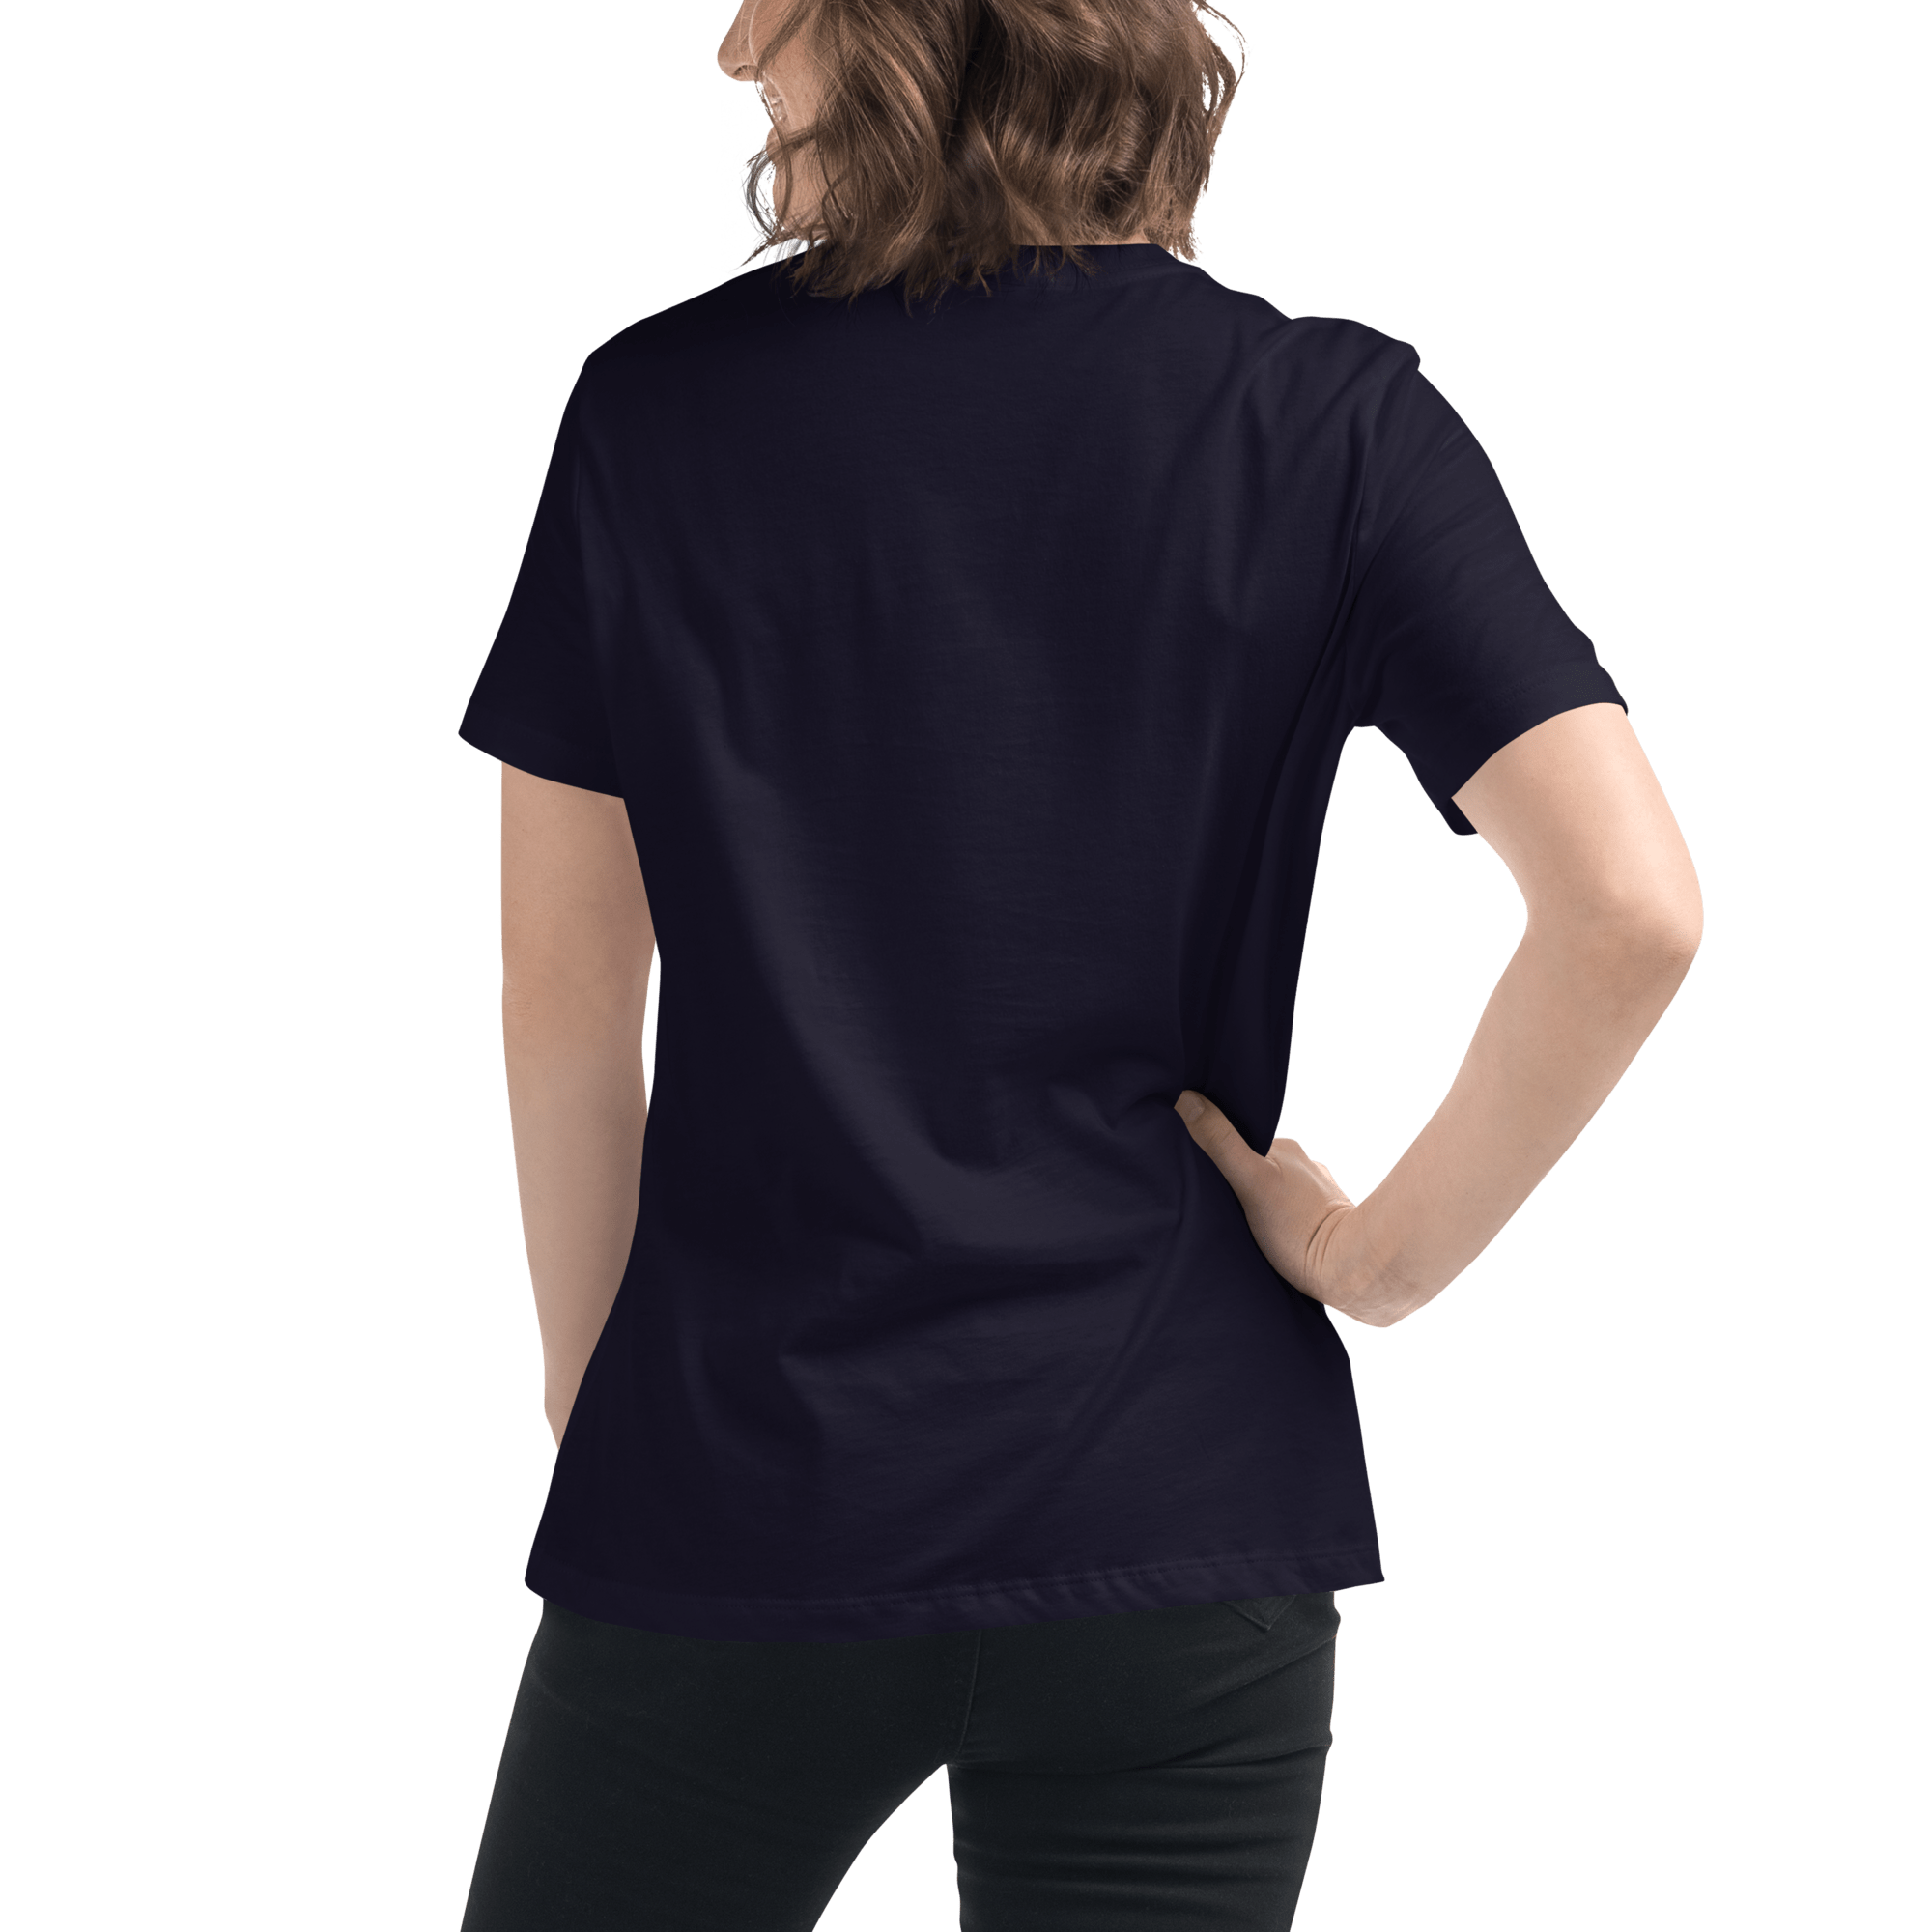 Obvs Women's Relaxed T-Shirt Obviously Shirts & Tops Jolly & Goode